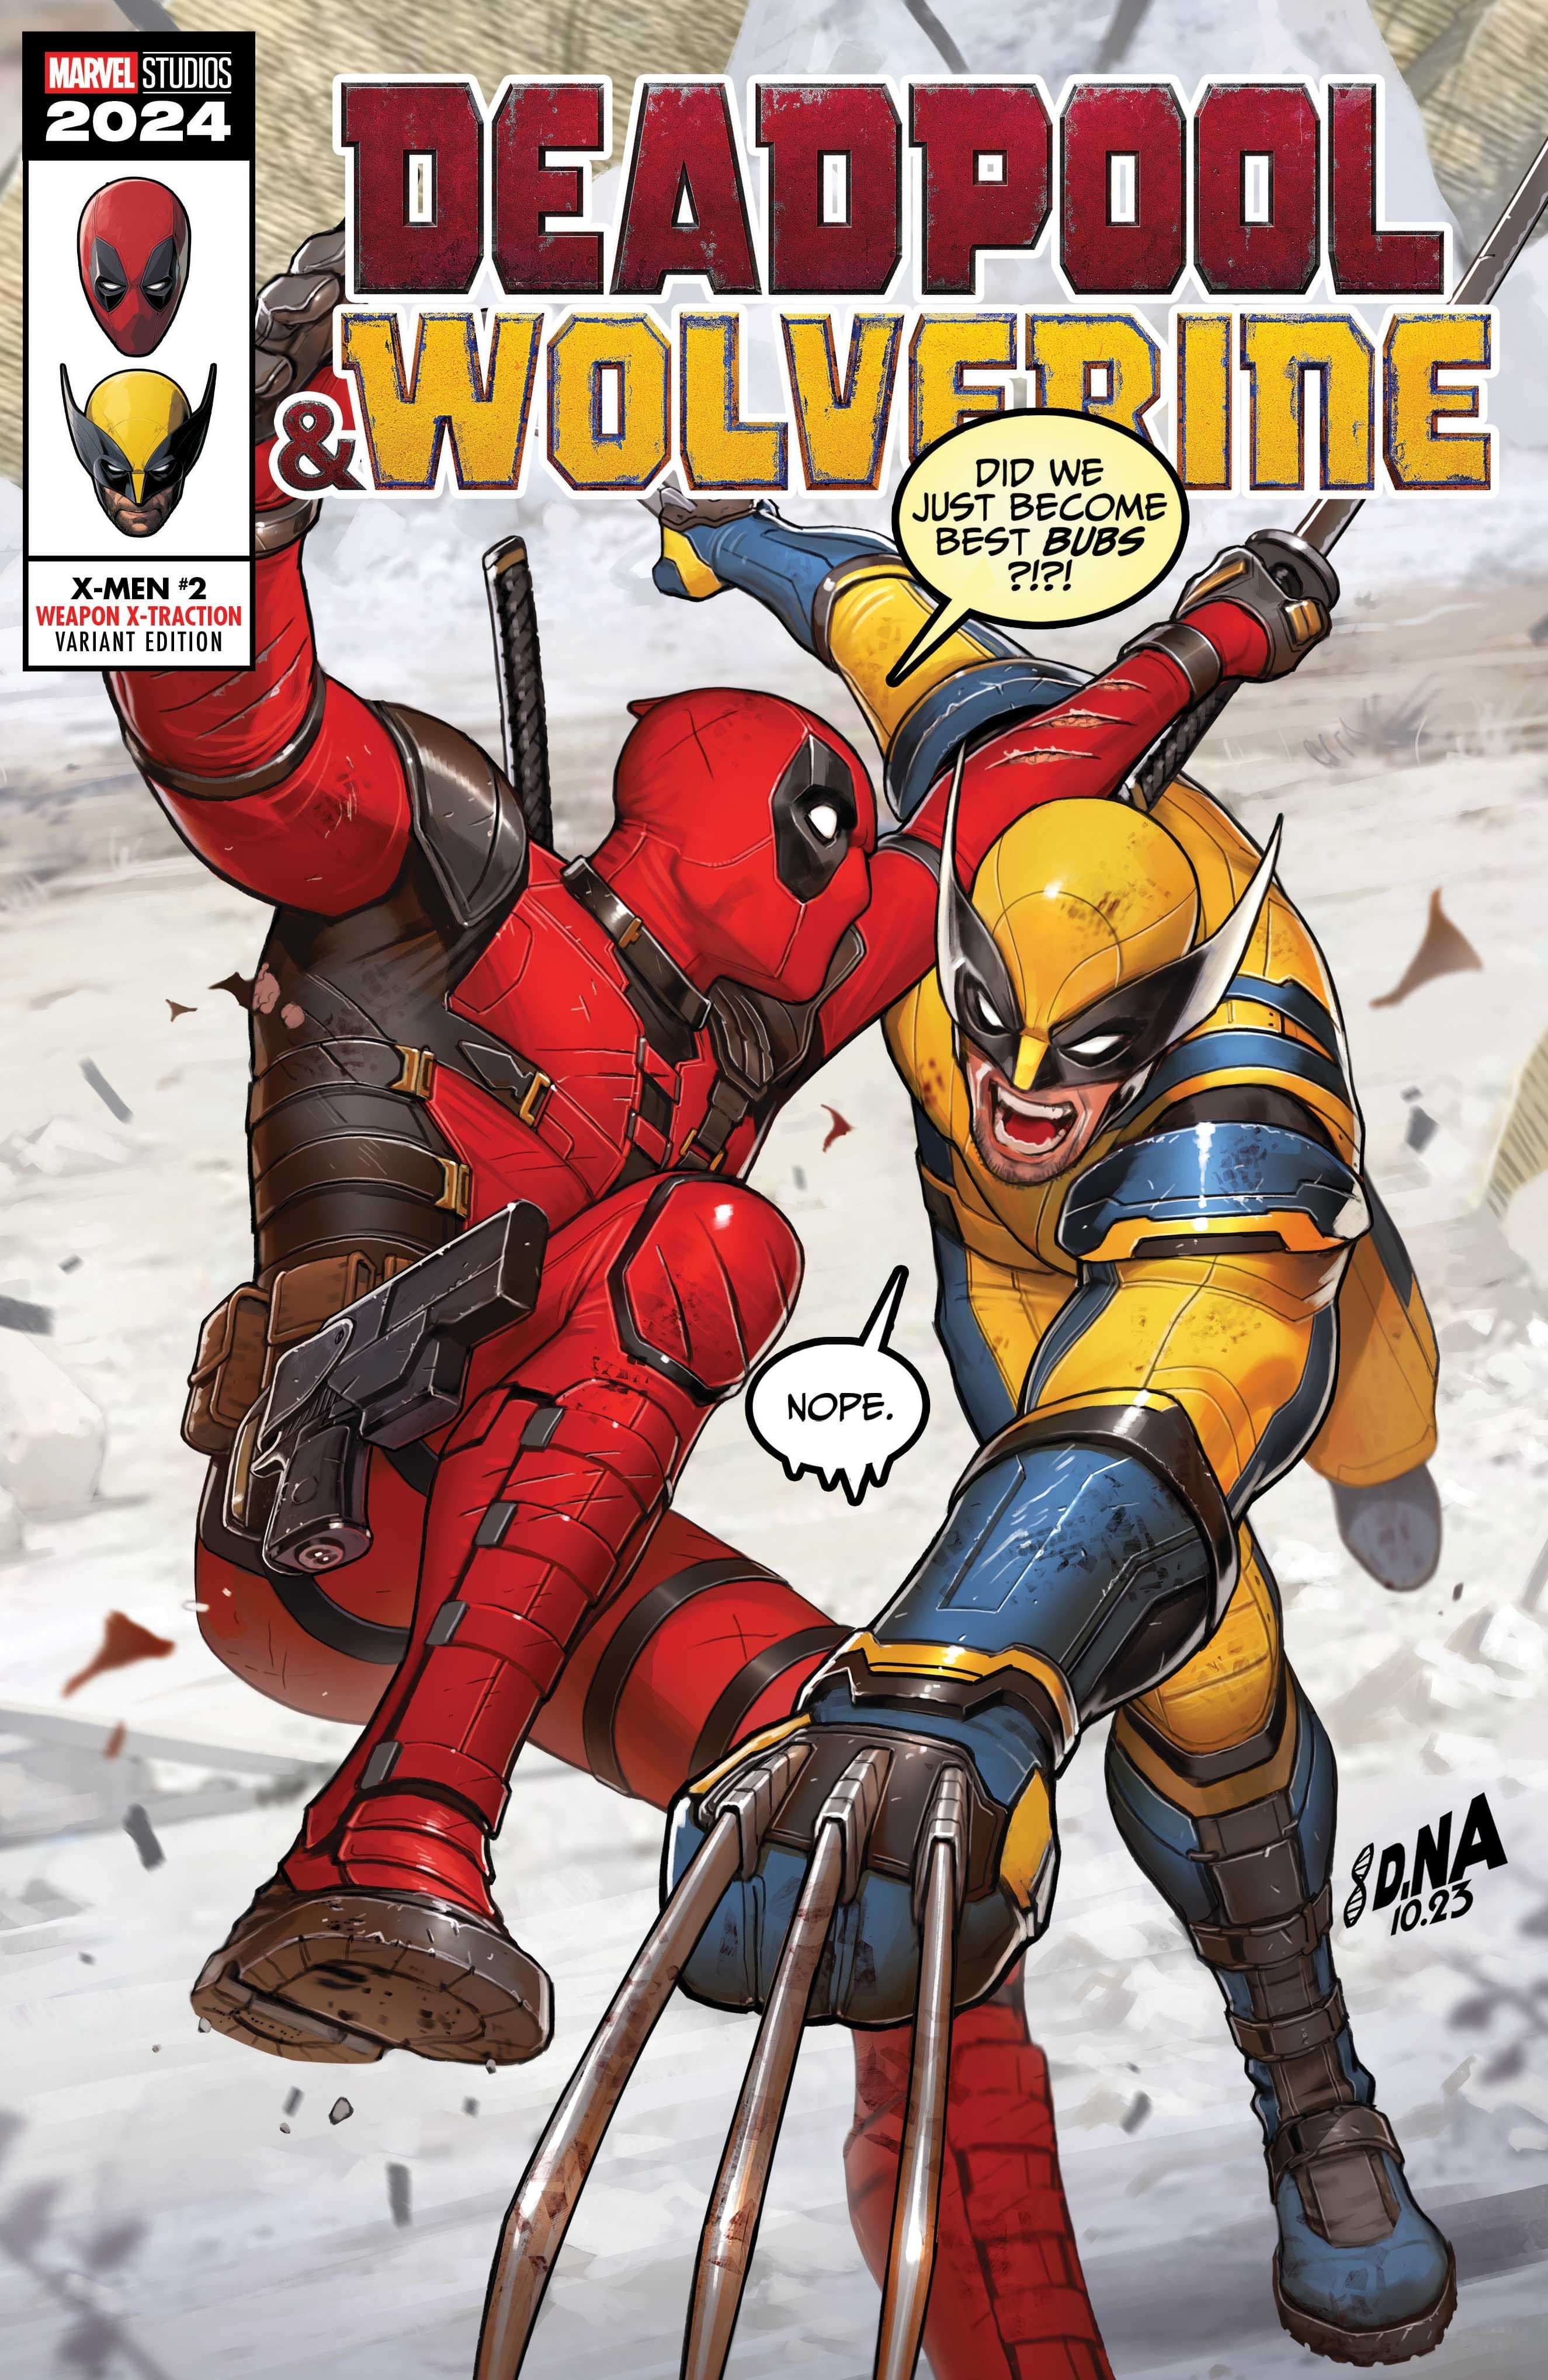 X-MEN #2 Deadpool & Wolverine Weapon X-Traction Variant by David Nakay